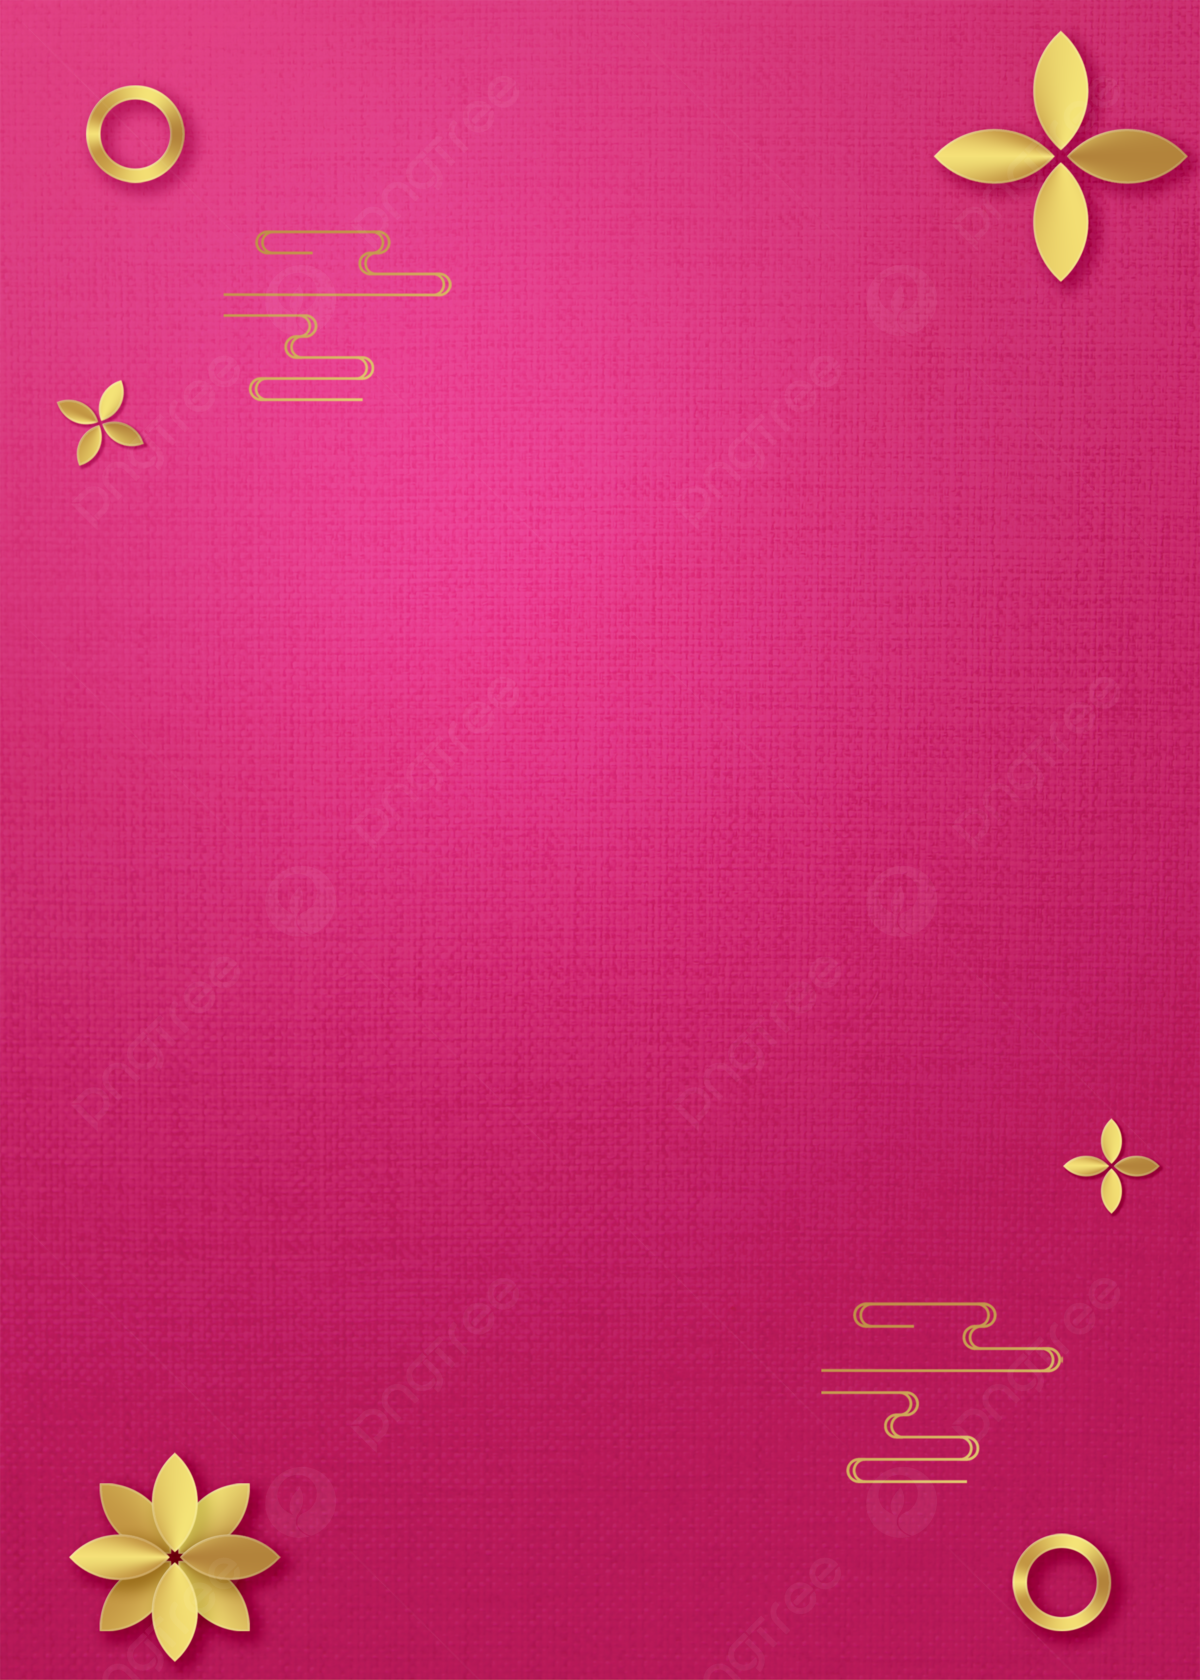 Pink Luxury Wallpapers